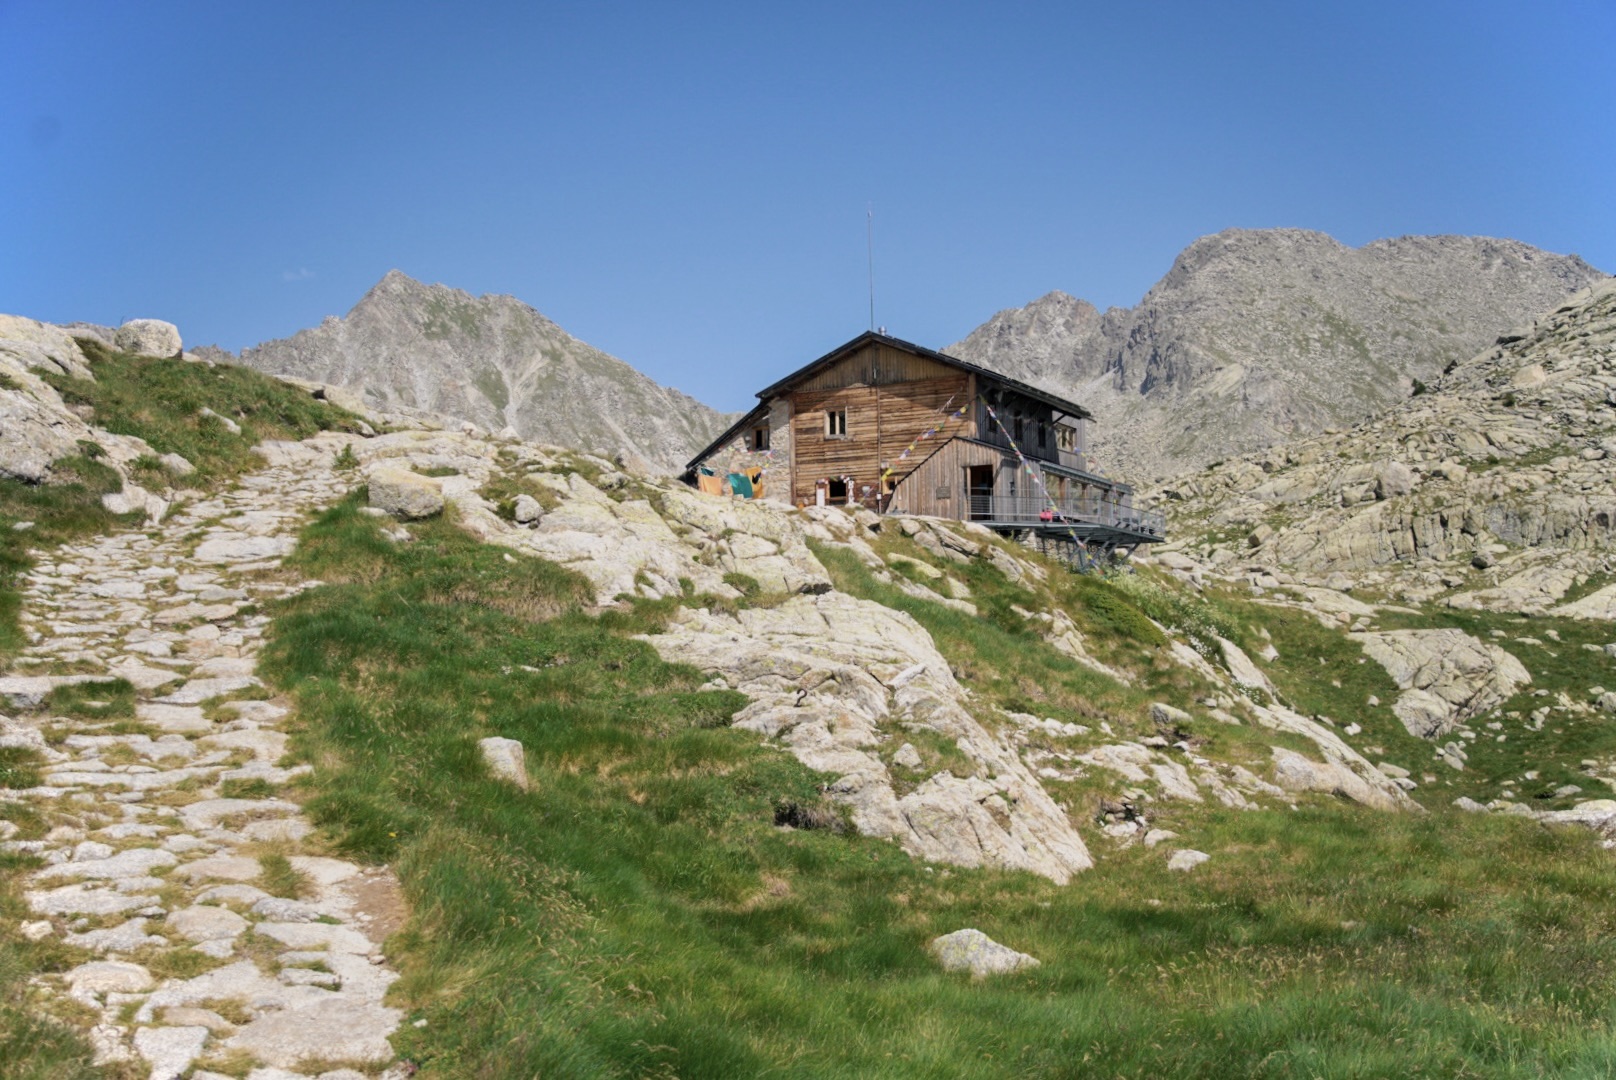 Wooden building in the alps.